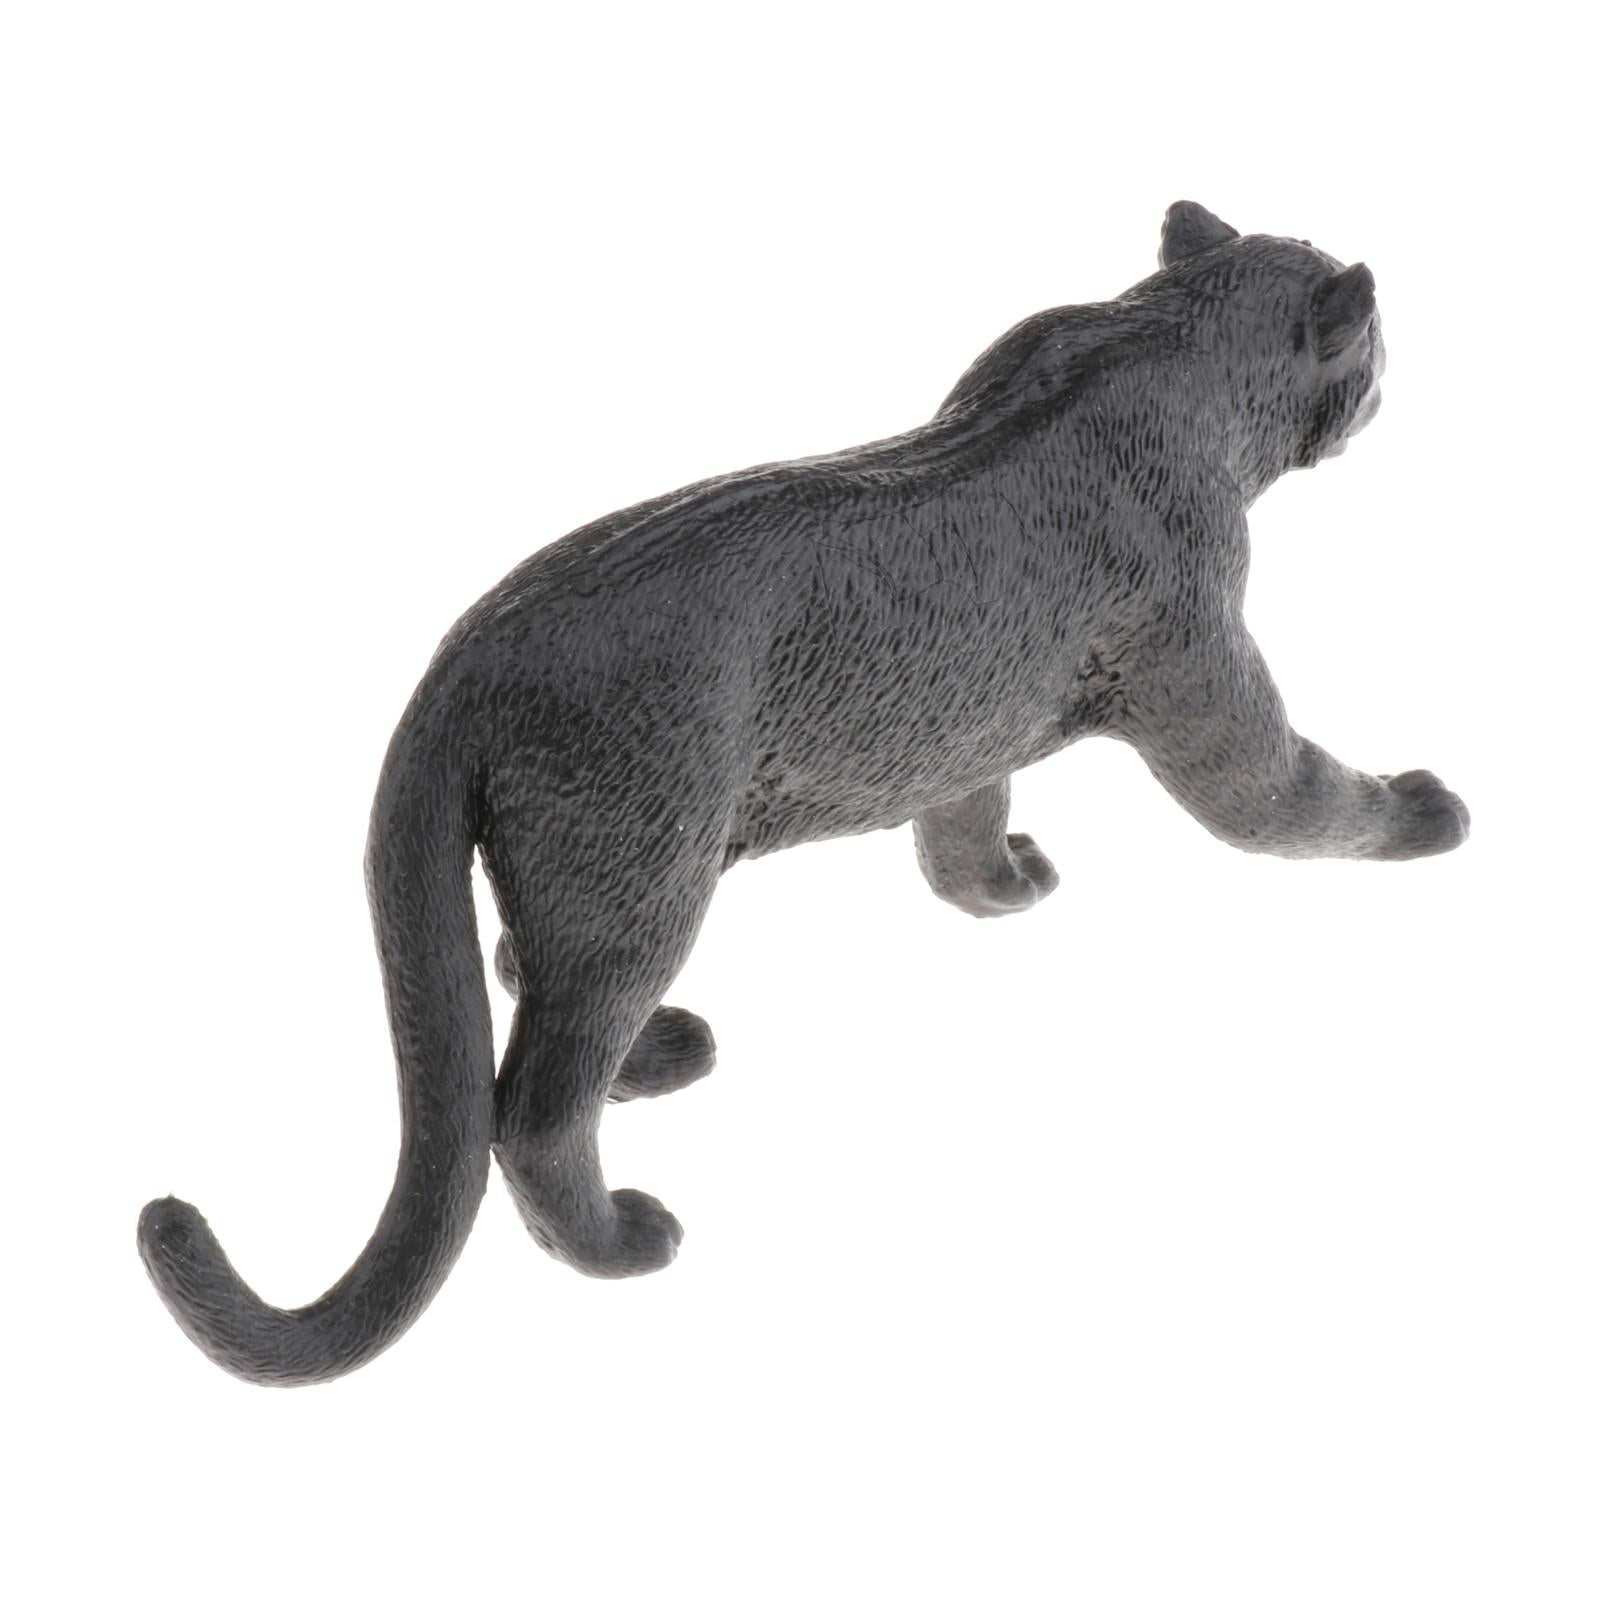 Simulation Animal Figures Model Kids Educational Toys Gifts  Panther